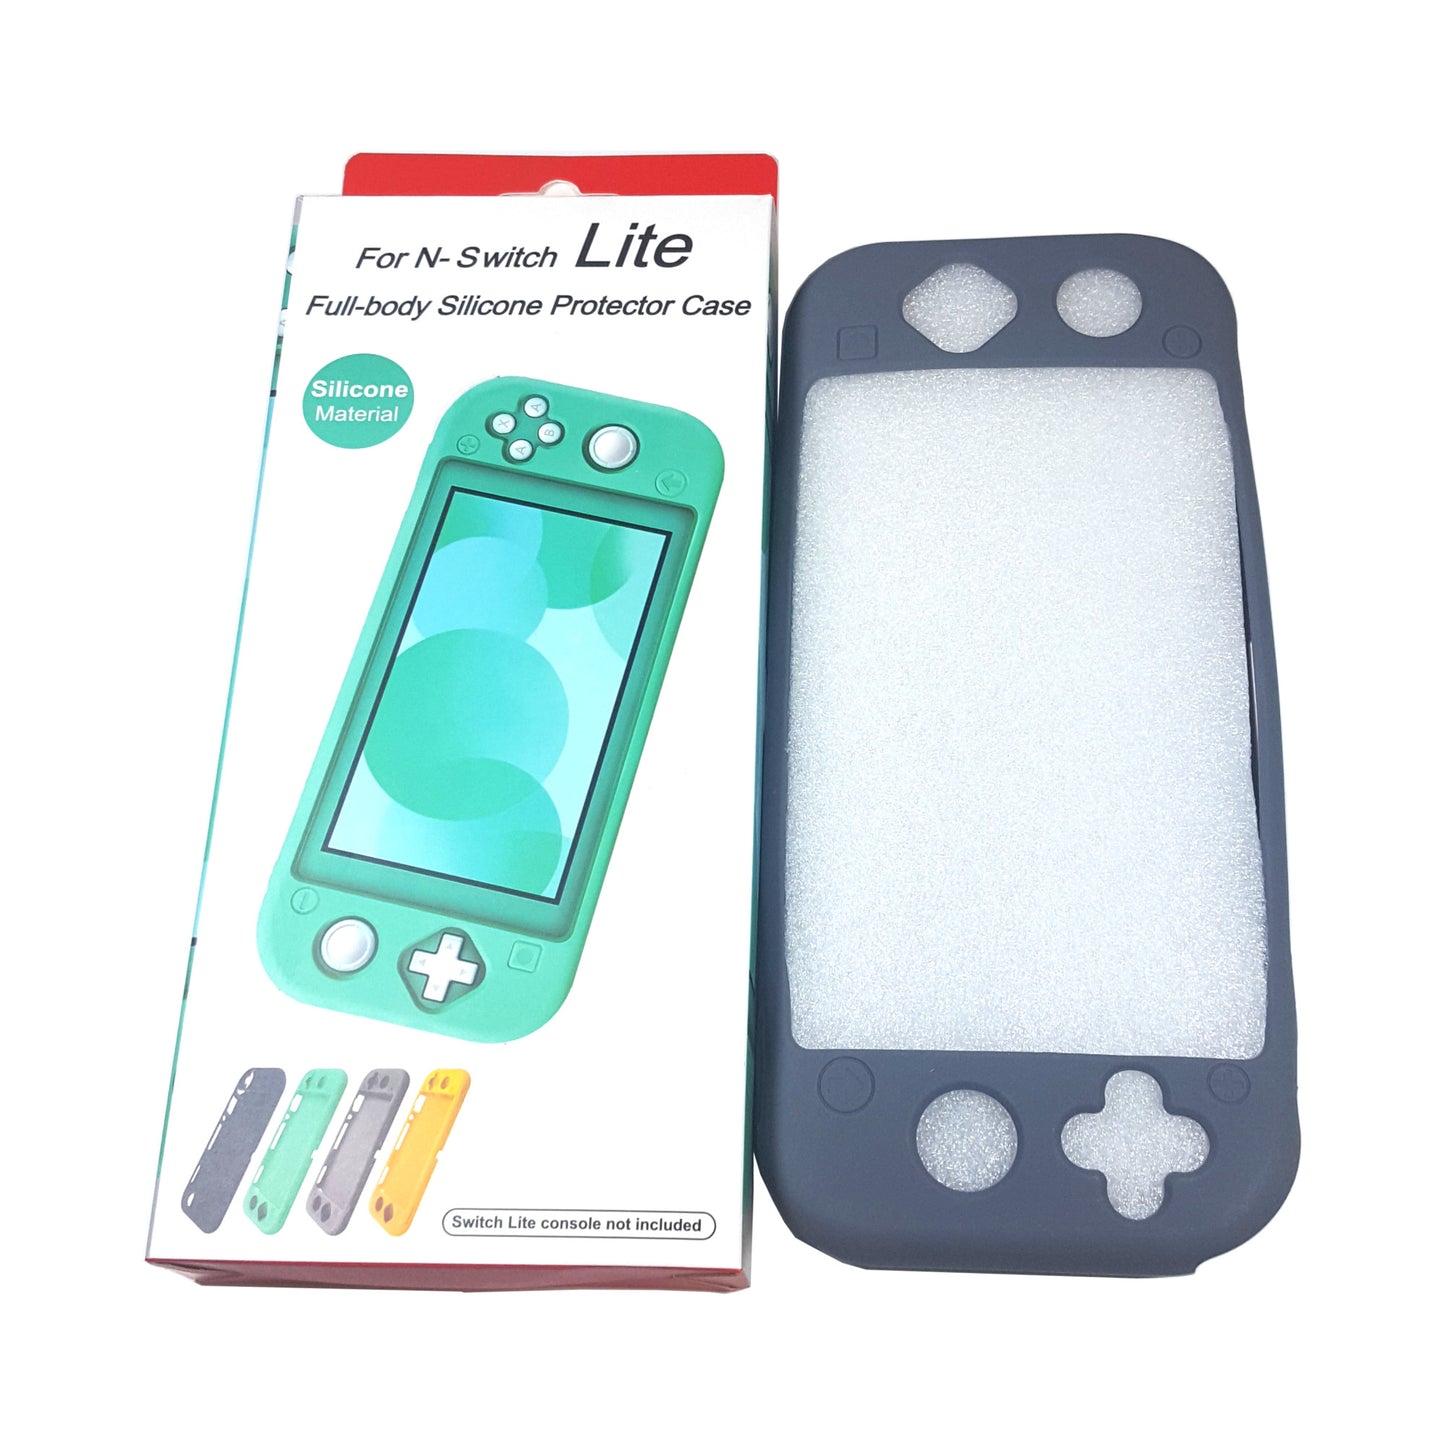 Silicone Full-Body Protector Case for Nintendo Switch Lite - Gray